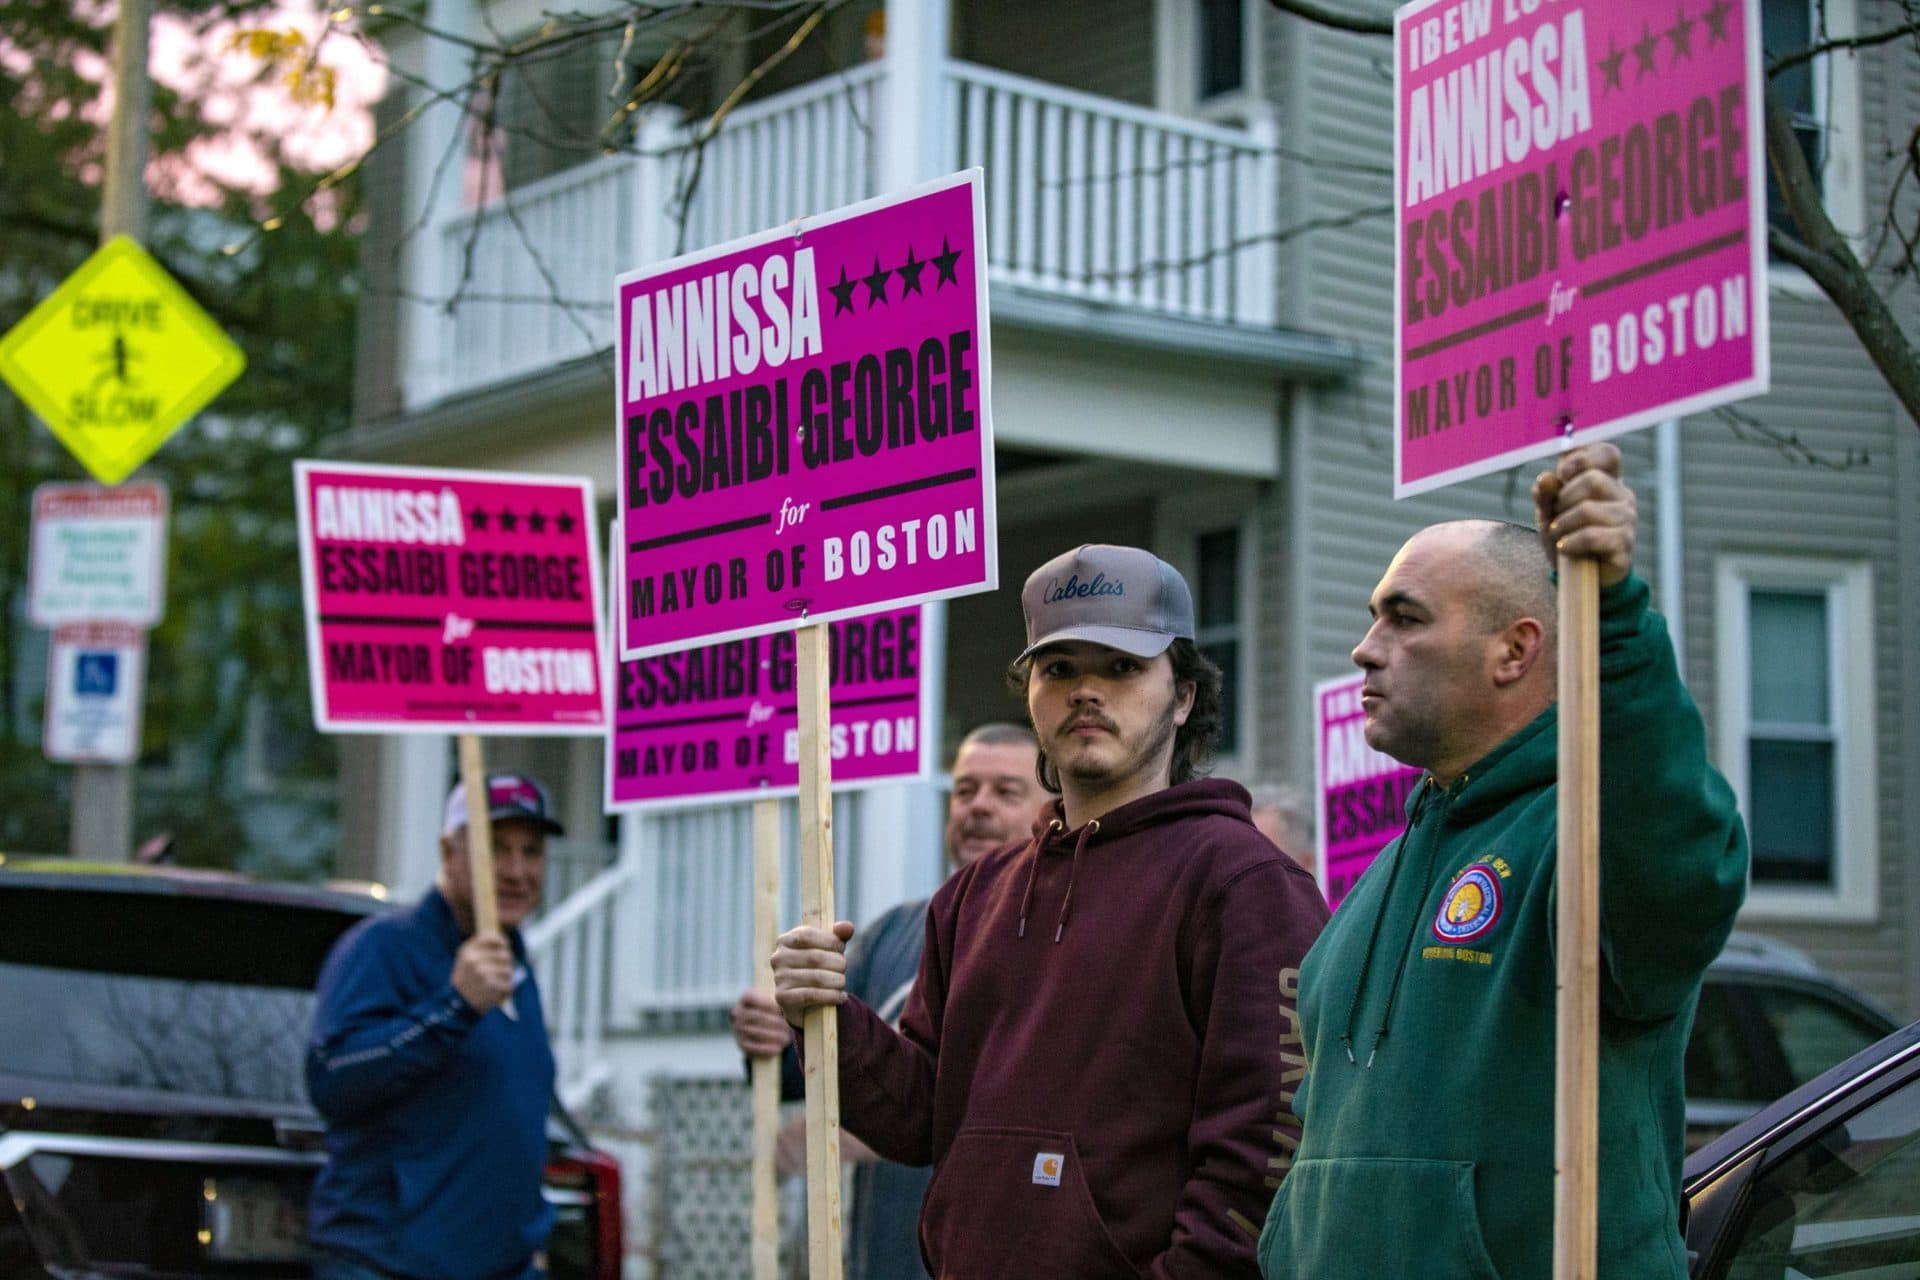 Supporters for Annissa Essaibi George hold signs outside of the Bellflower Apartments in Dorchester where the candidate voted. (Jesse Costa/WBUR)